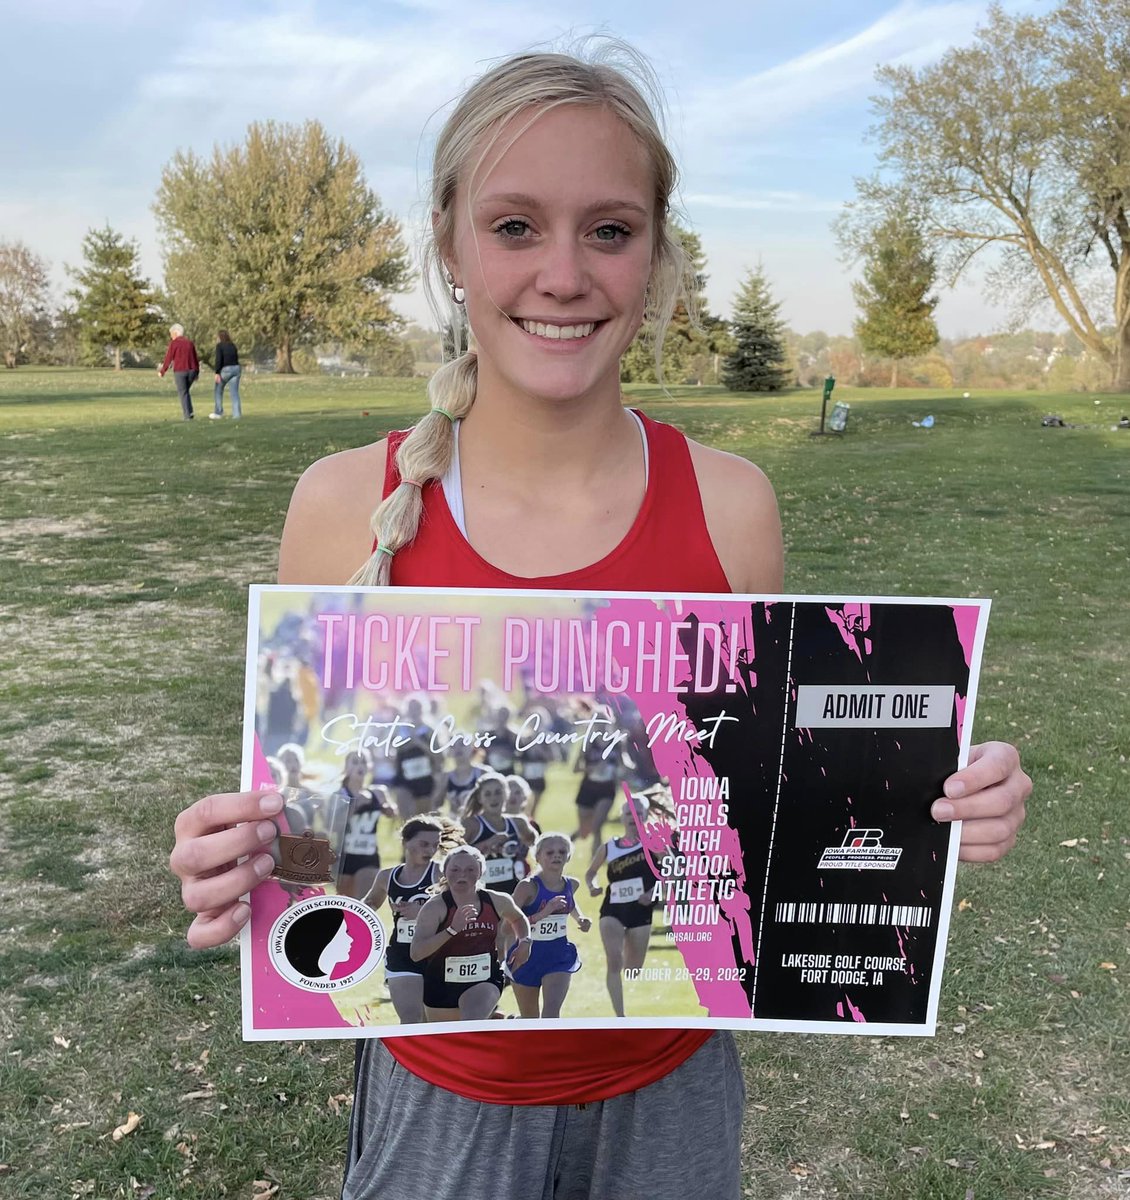 Congratulations to Addy Schreck on qualifying for the IGHSAU Class 1A State Cross Country Meet!